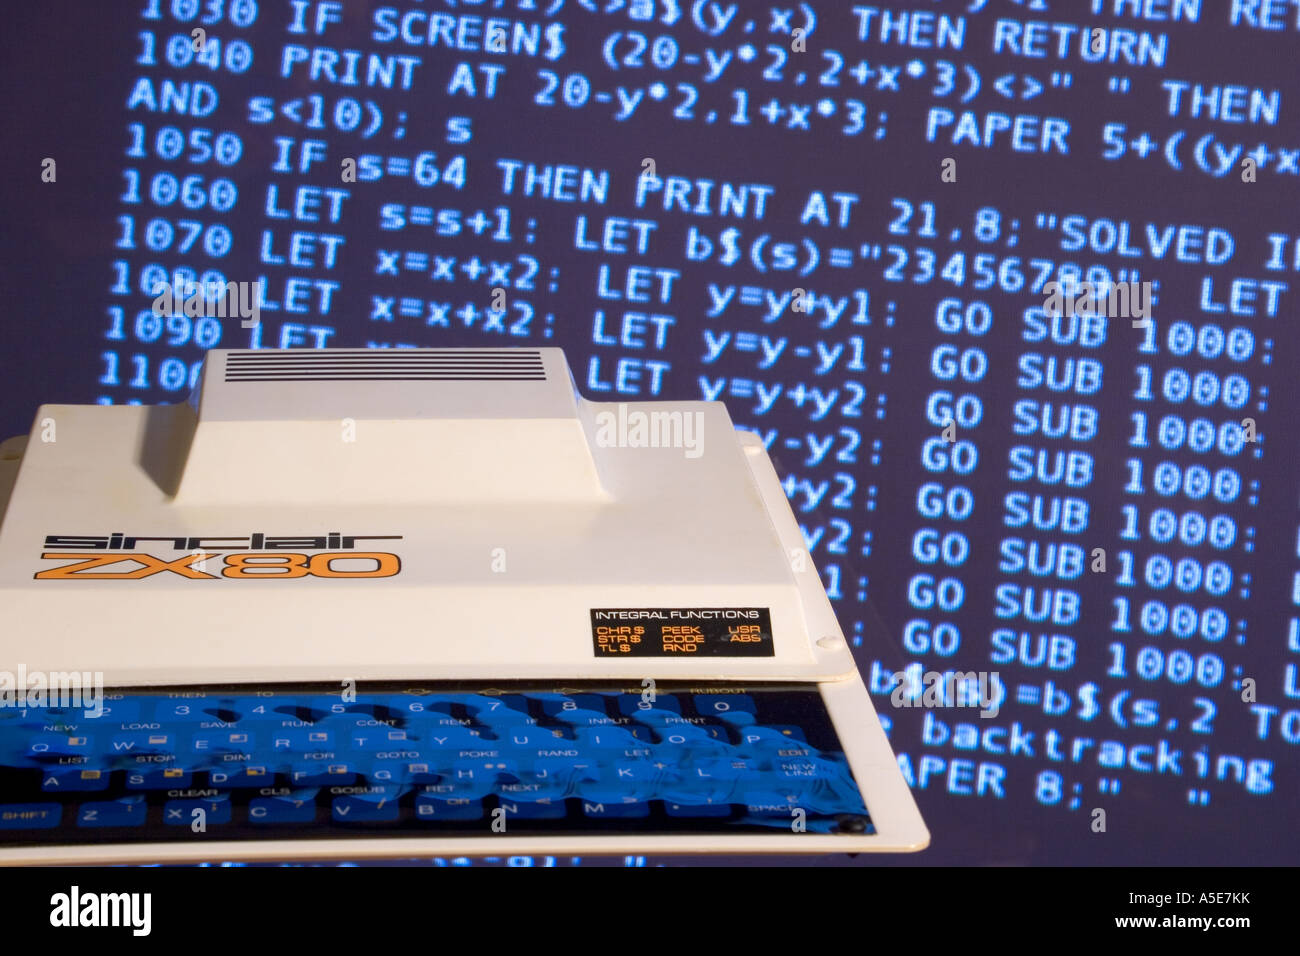 Sinclair ZX80 home computer against tv screen displaying BASIC programming language code Stock Photo